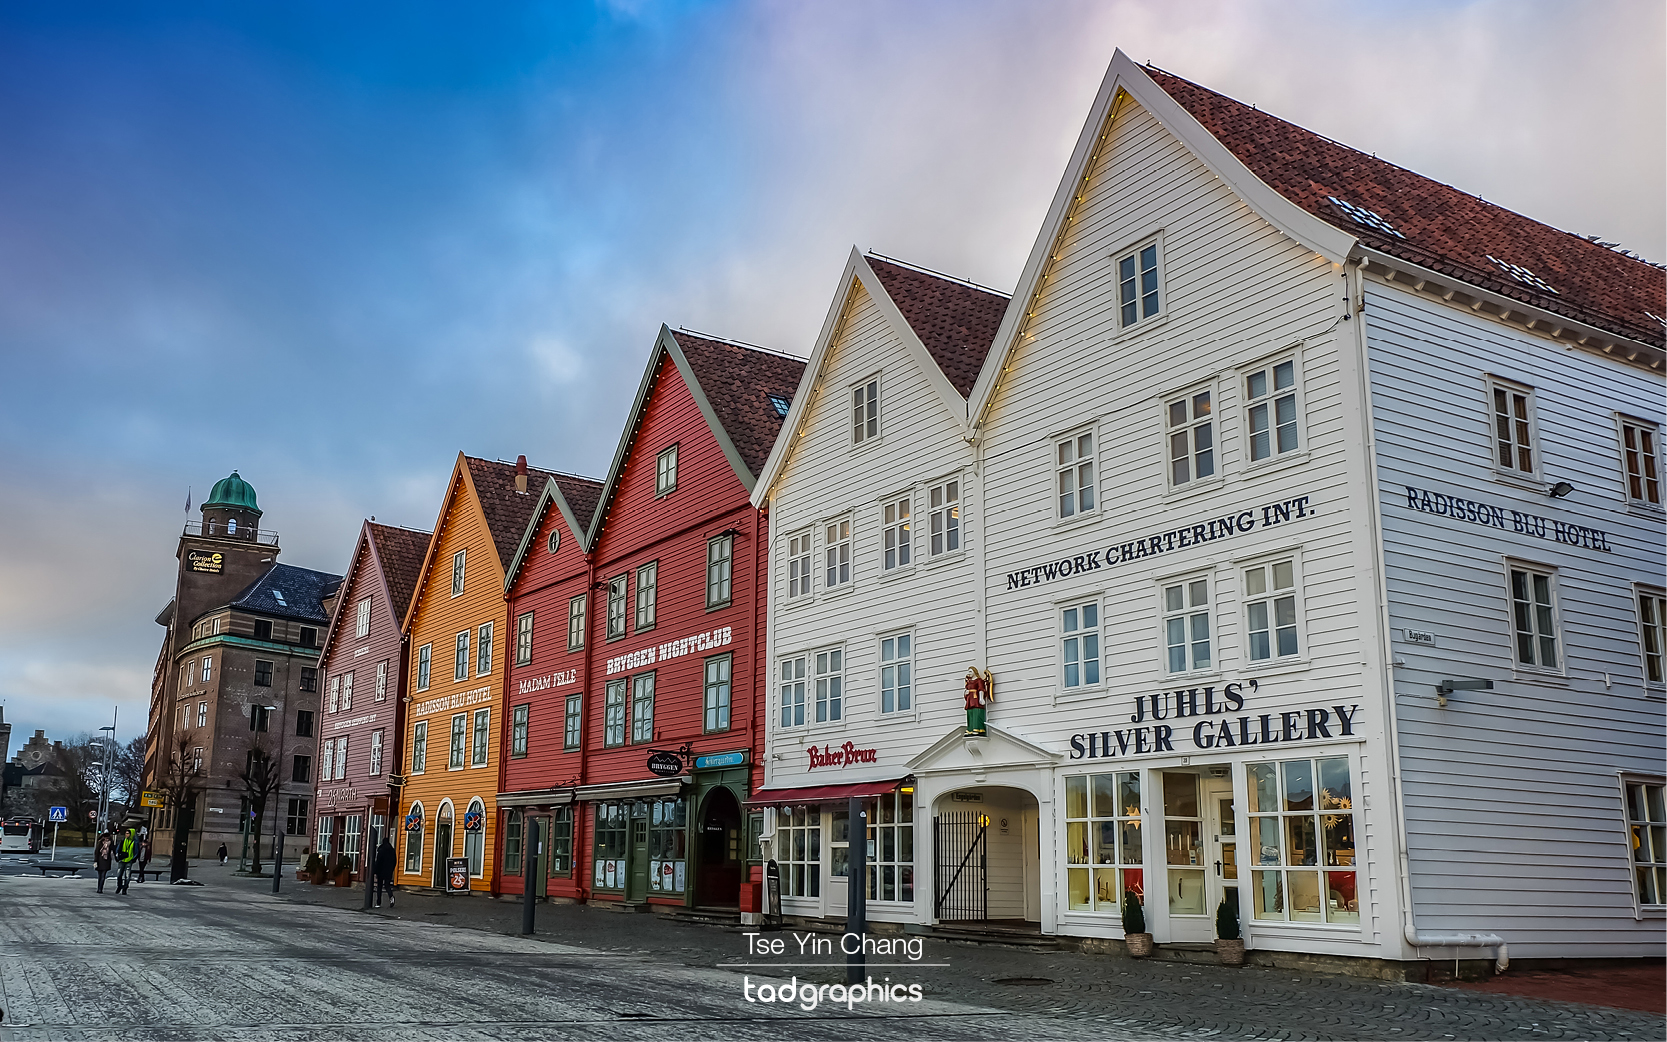 Bryggen is one of the most photographed tourist spots, these colourful buildings enjoy a historic quaintness that can only be found in Europe